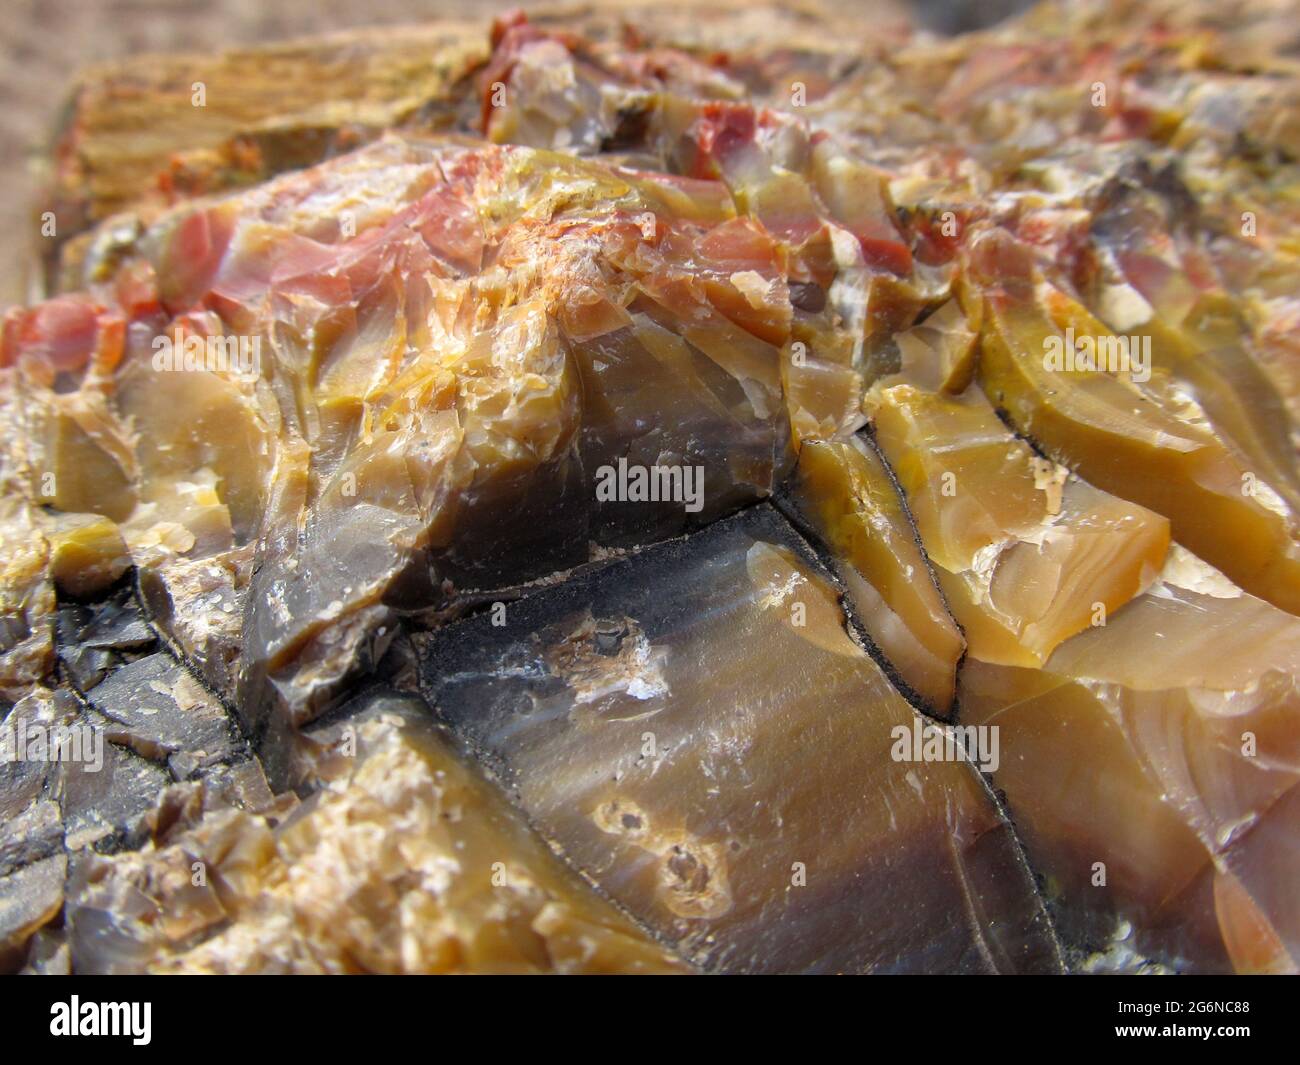 Close-up view of the colorful petrified wood samples in the Petrified Forest state park, Escalante, Utah, USA Stock Photo